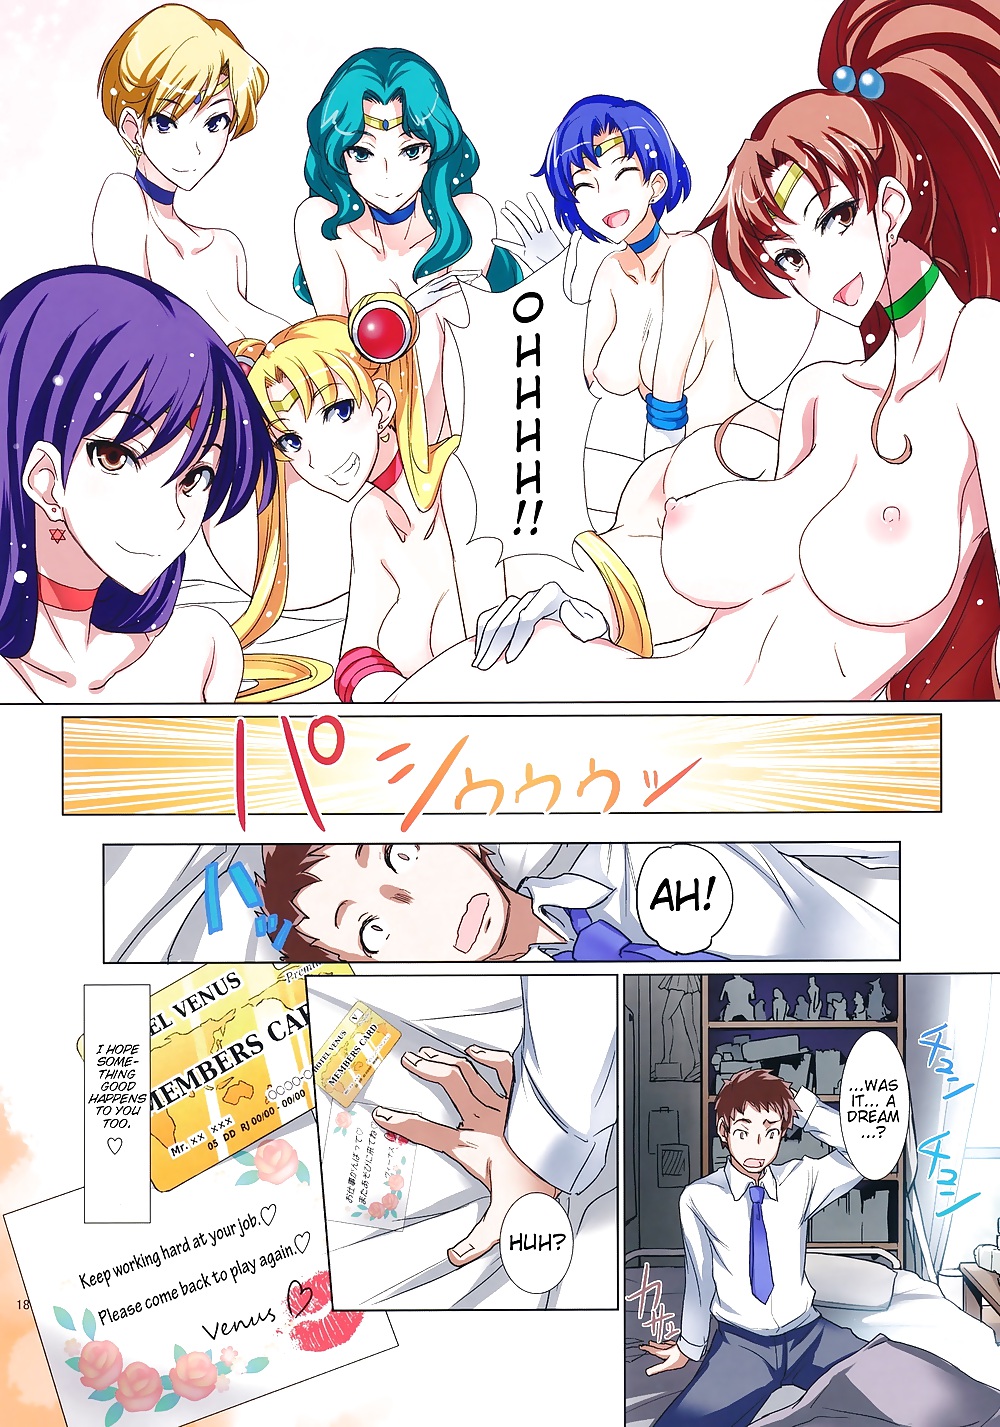 Welcome to Hotel Venus! (Full Color Sailor Moon Doujinshi) #16500082